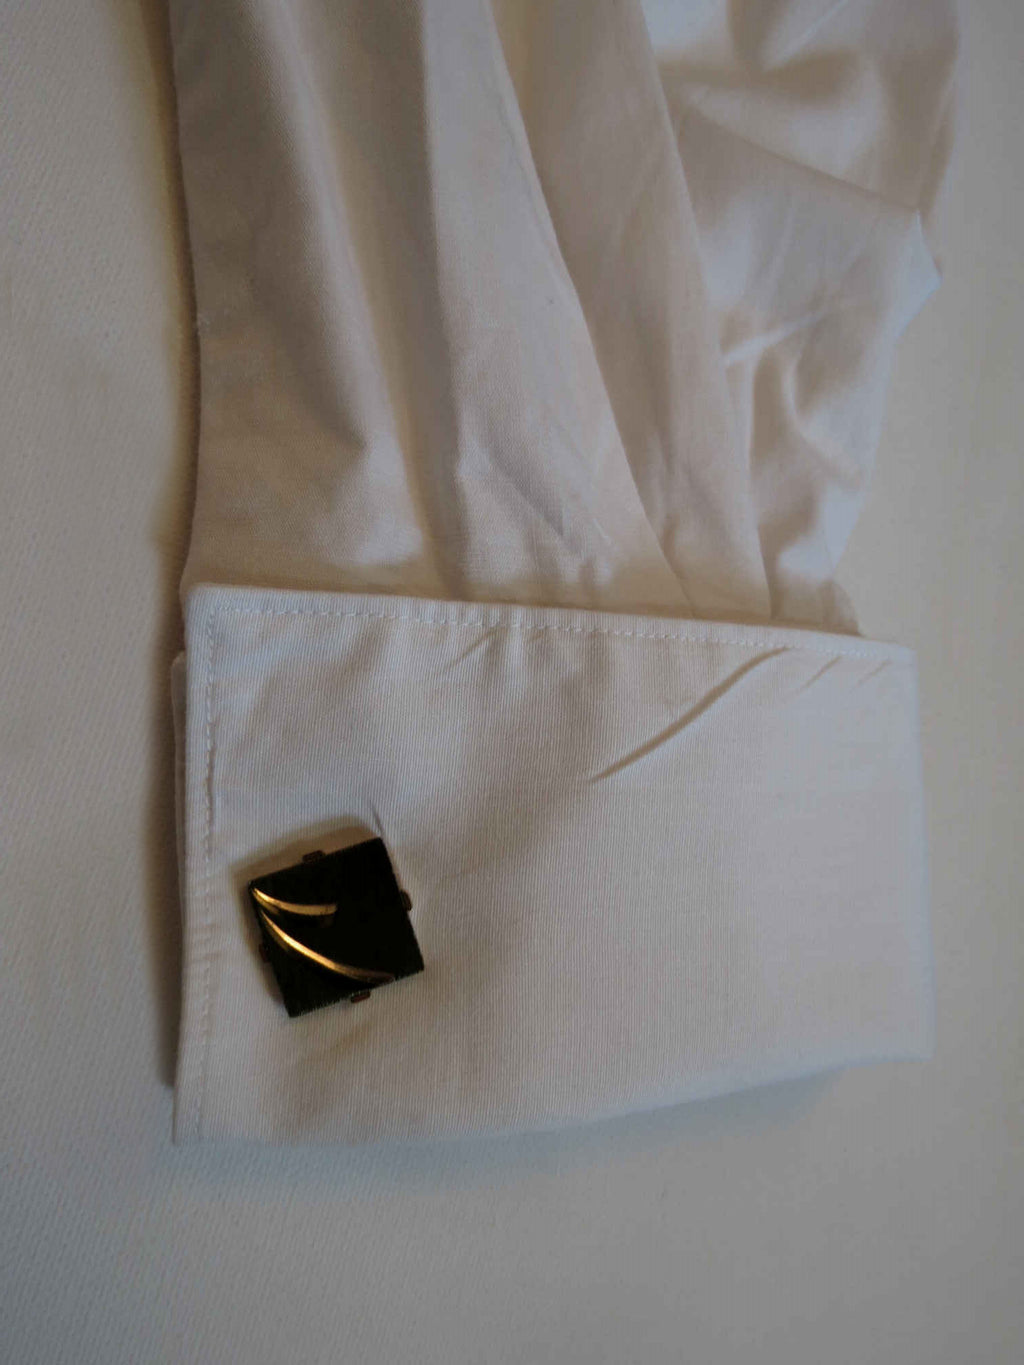 vintage 1970s swank cuff links square black and gold